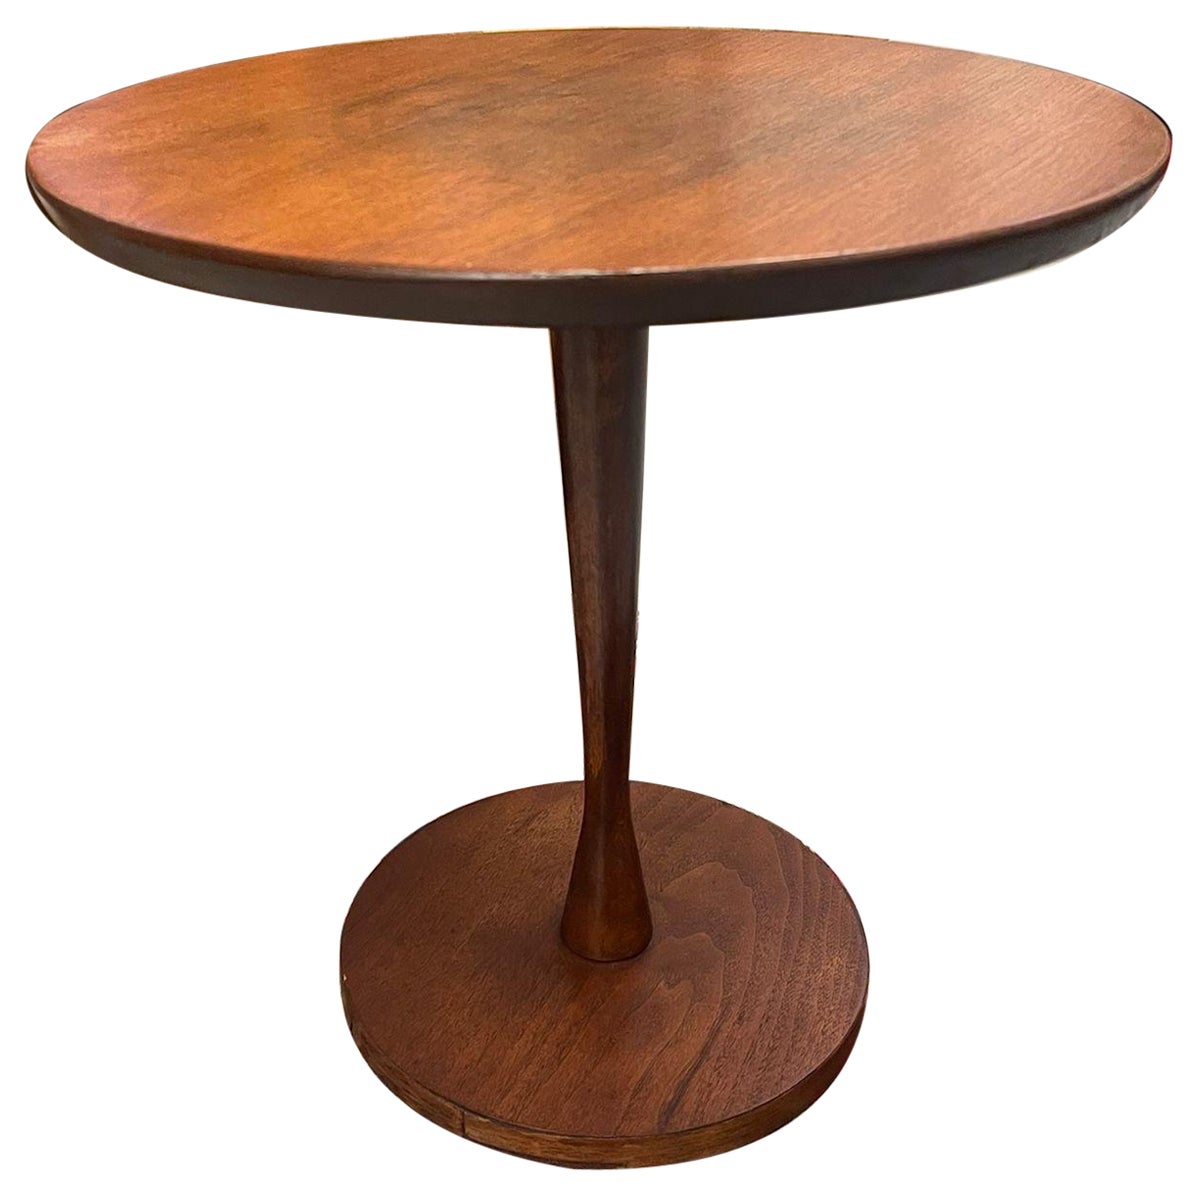 Vintage Mid Century Modern Atomic Circular Accent Side Table For Sale